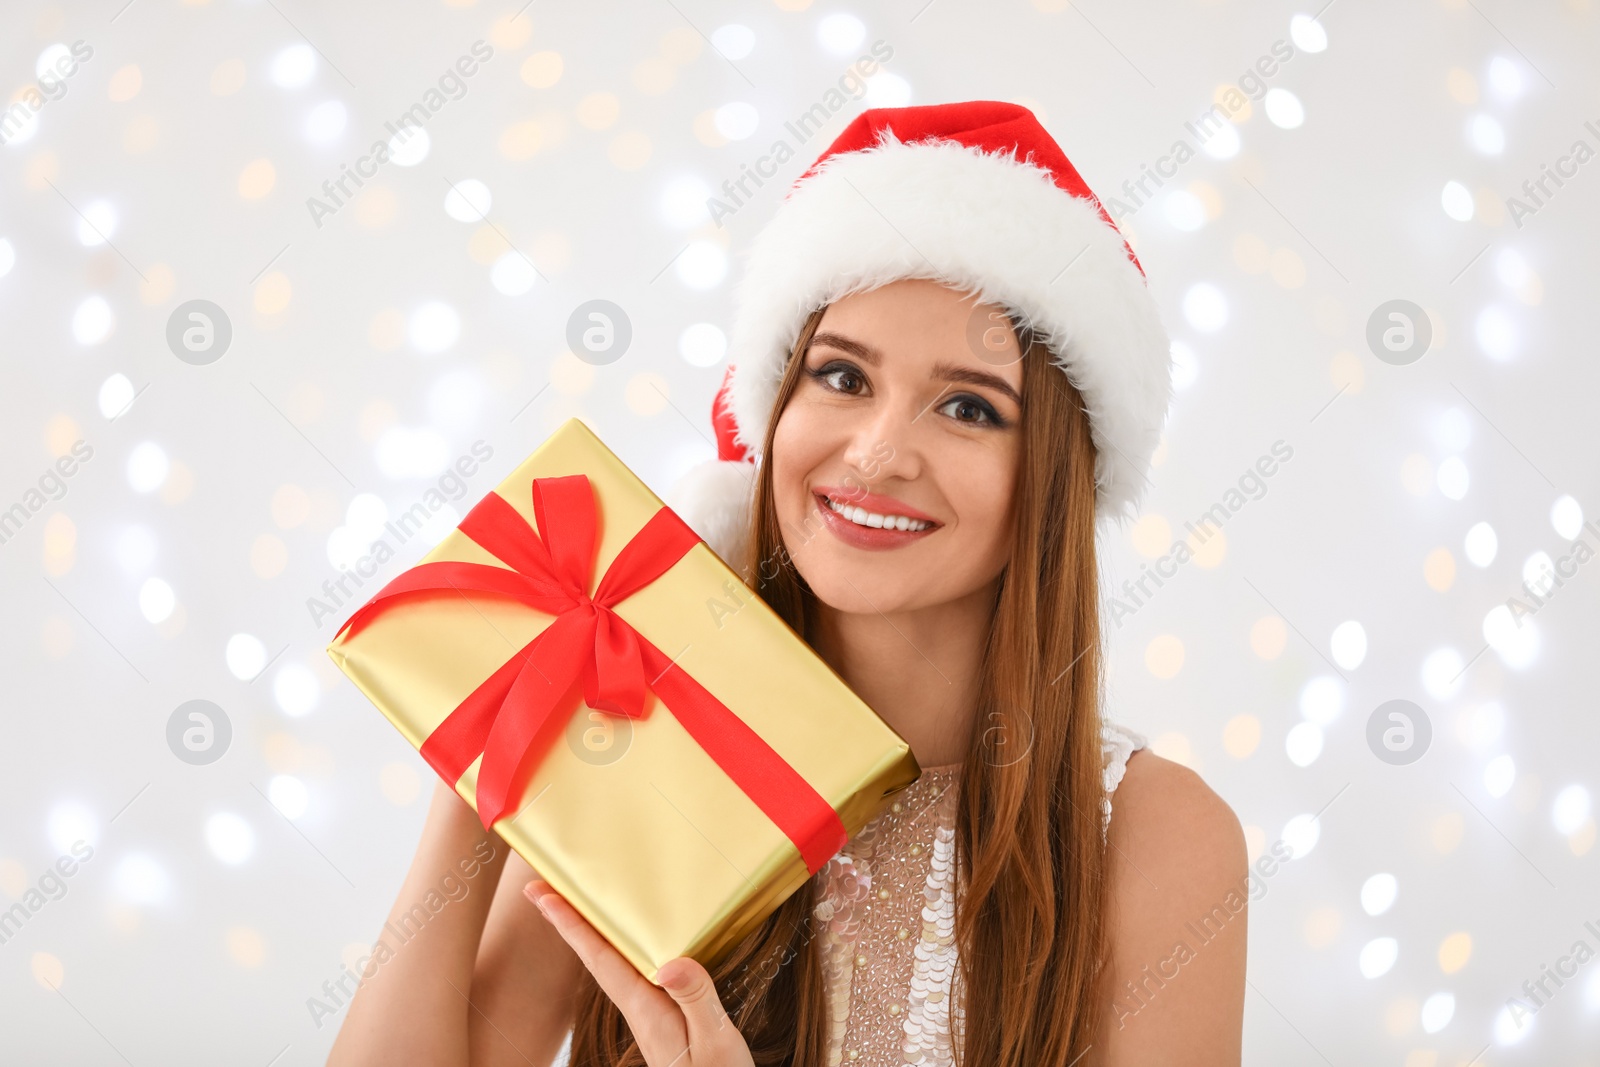 Photo of Happy young woman in Santa hat with gift box against blurred Christmas lights